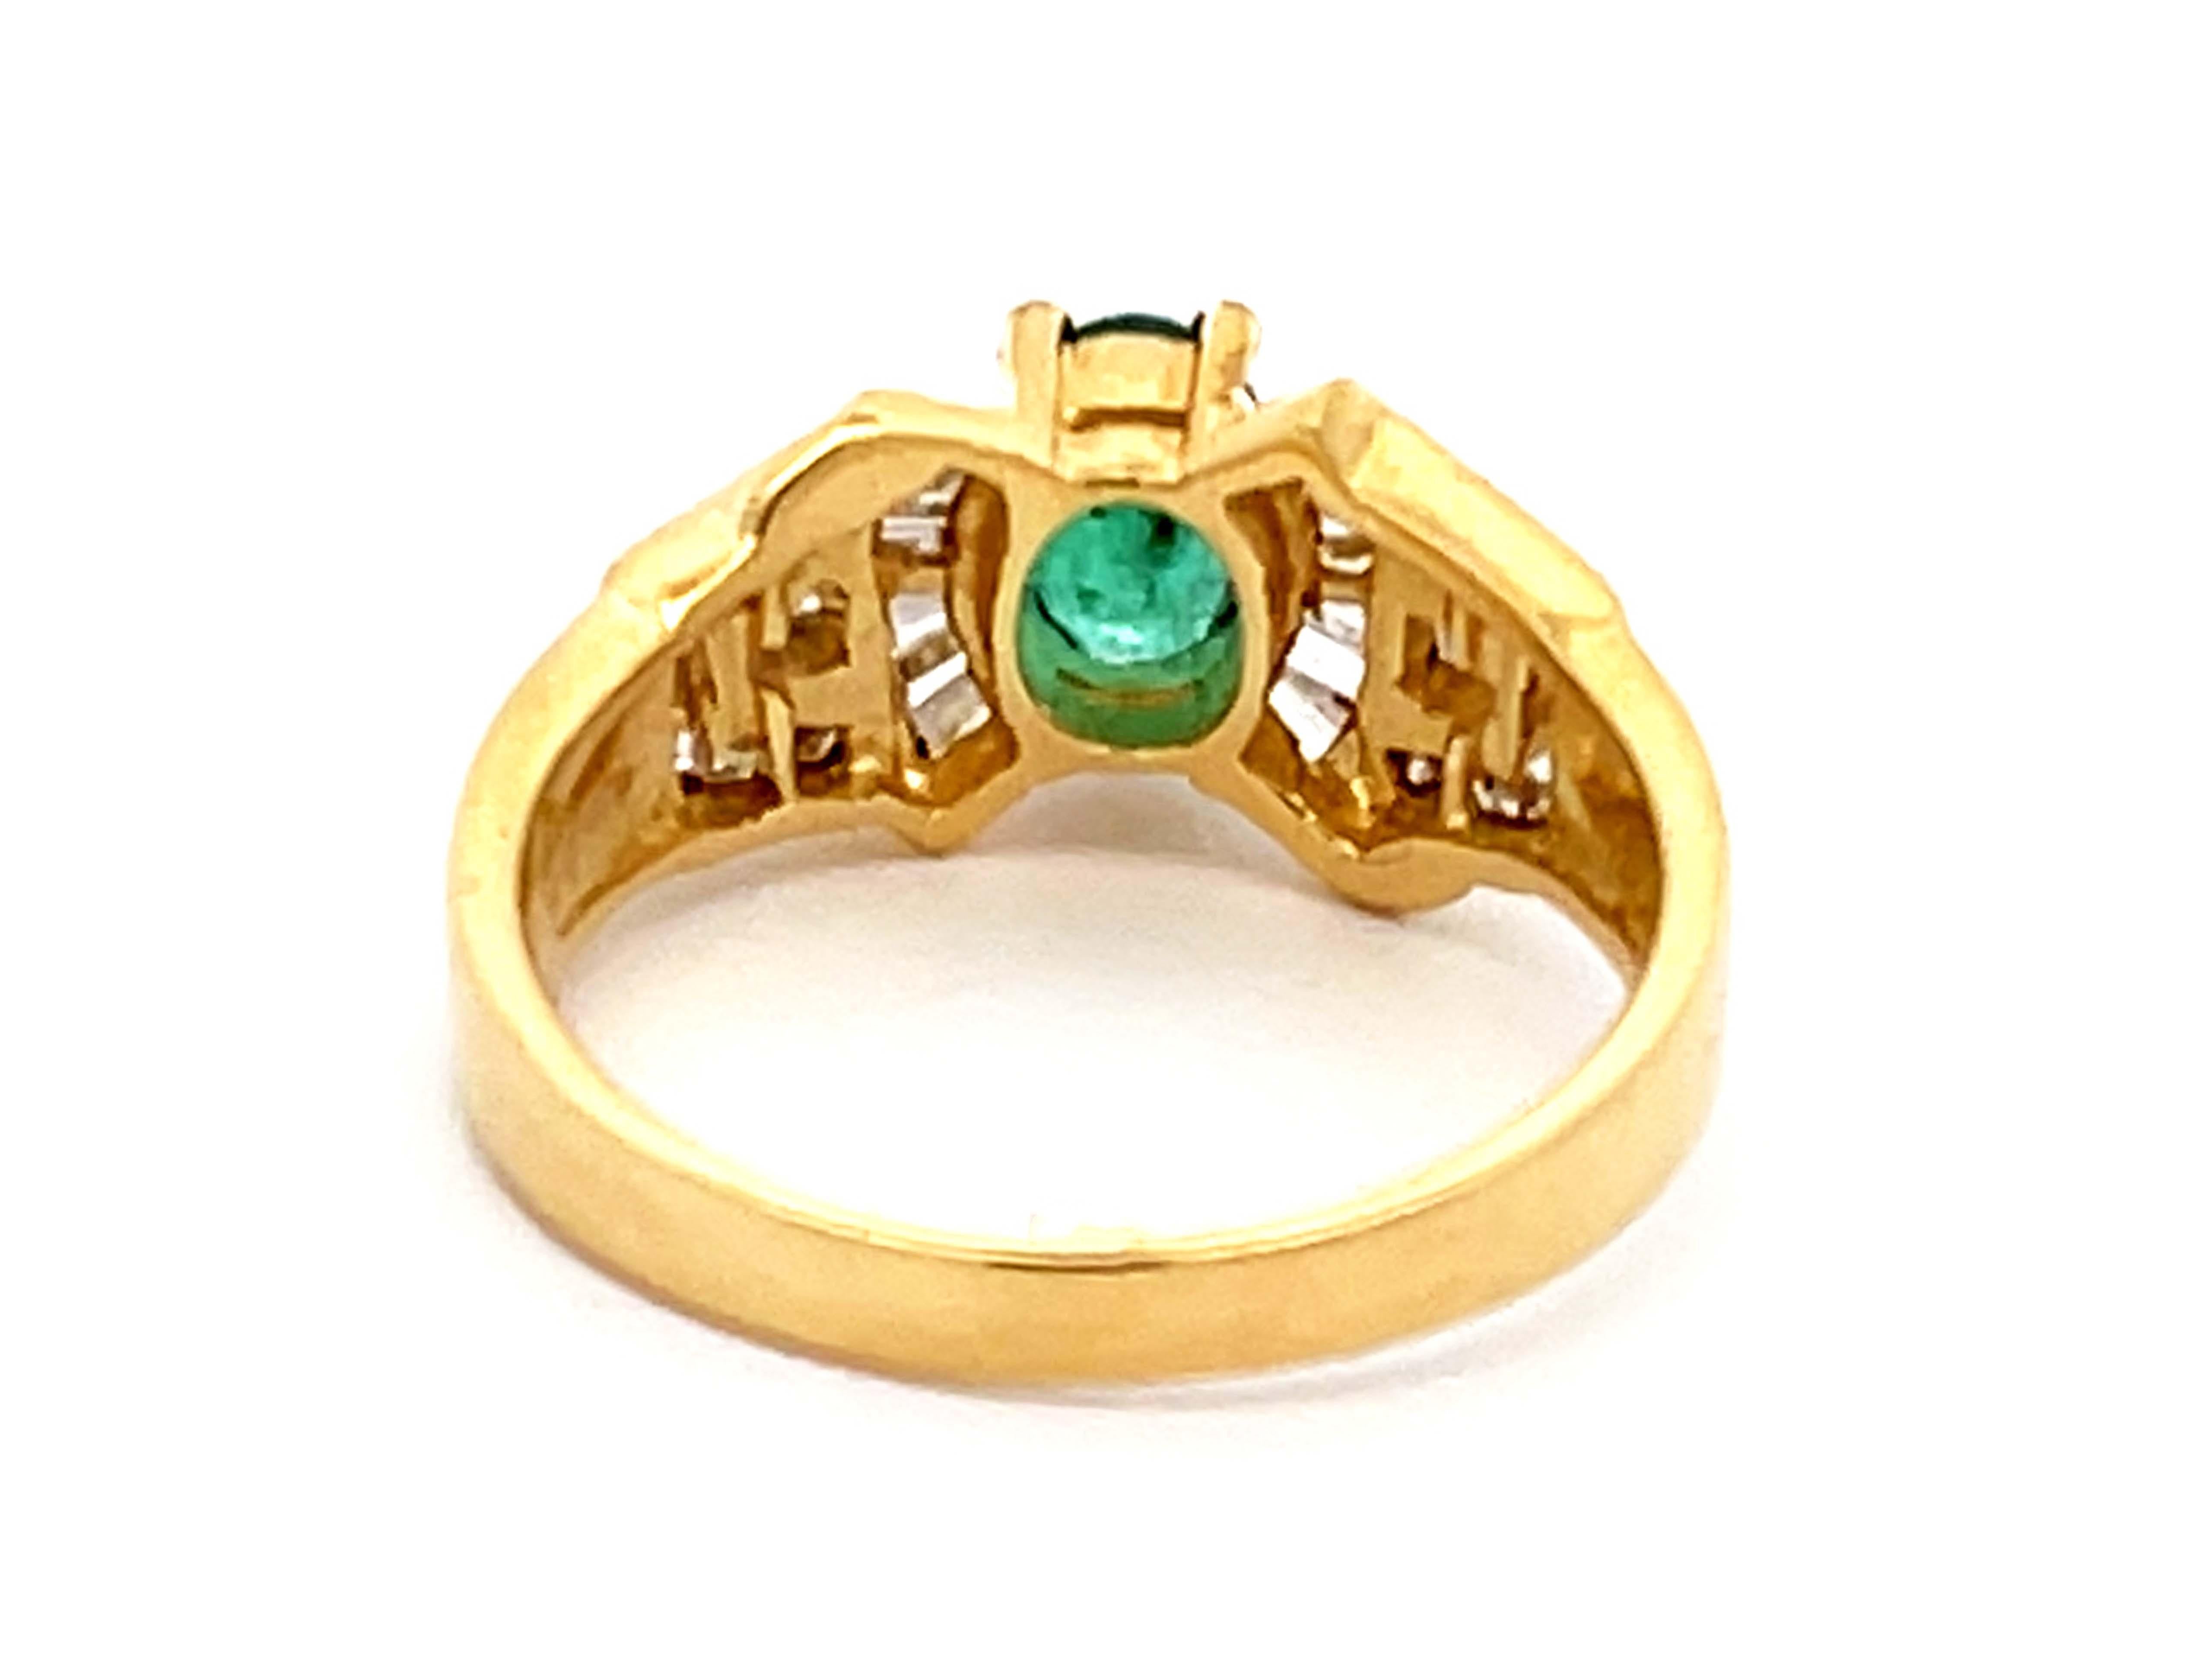 Oval Cut Vintage Green Emerald Diamond Ring in 14k Yellow Gold For Sale